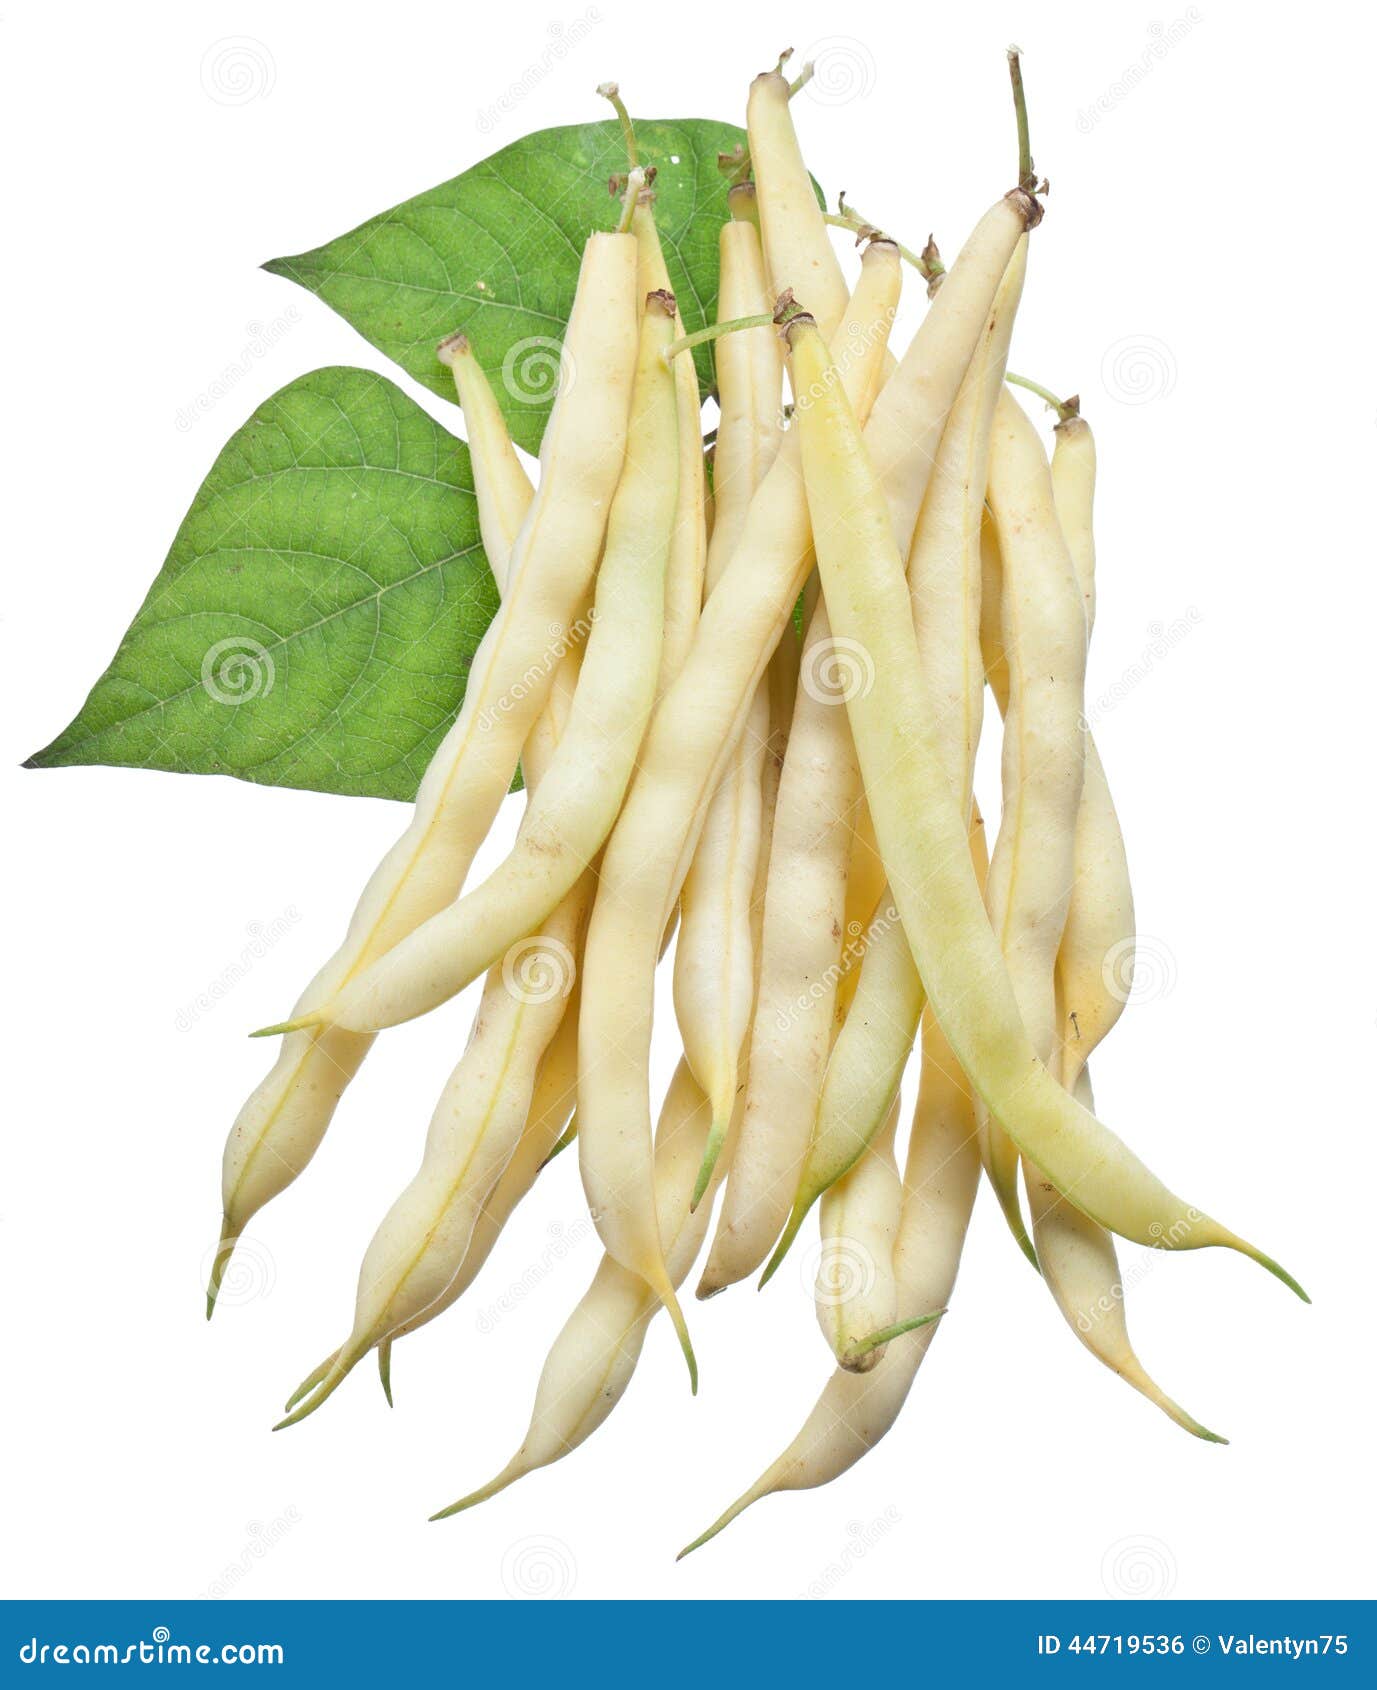 https://thumbs.dreamstime.com/z/yellow-string-beans-isolated-white-background-44719536.jpg